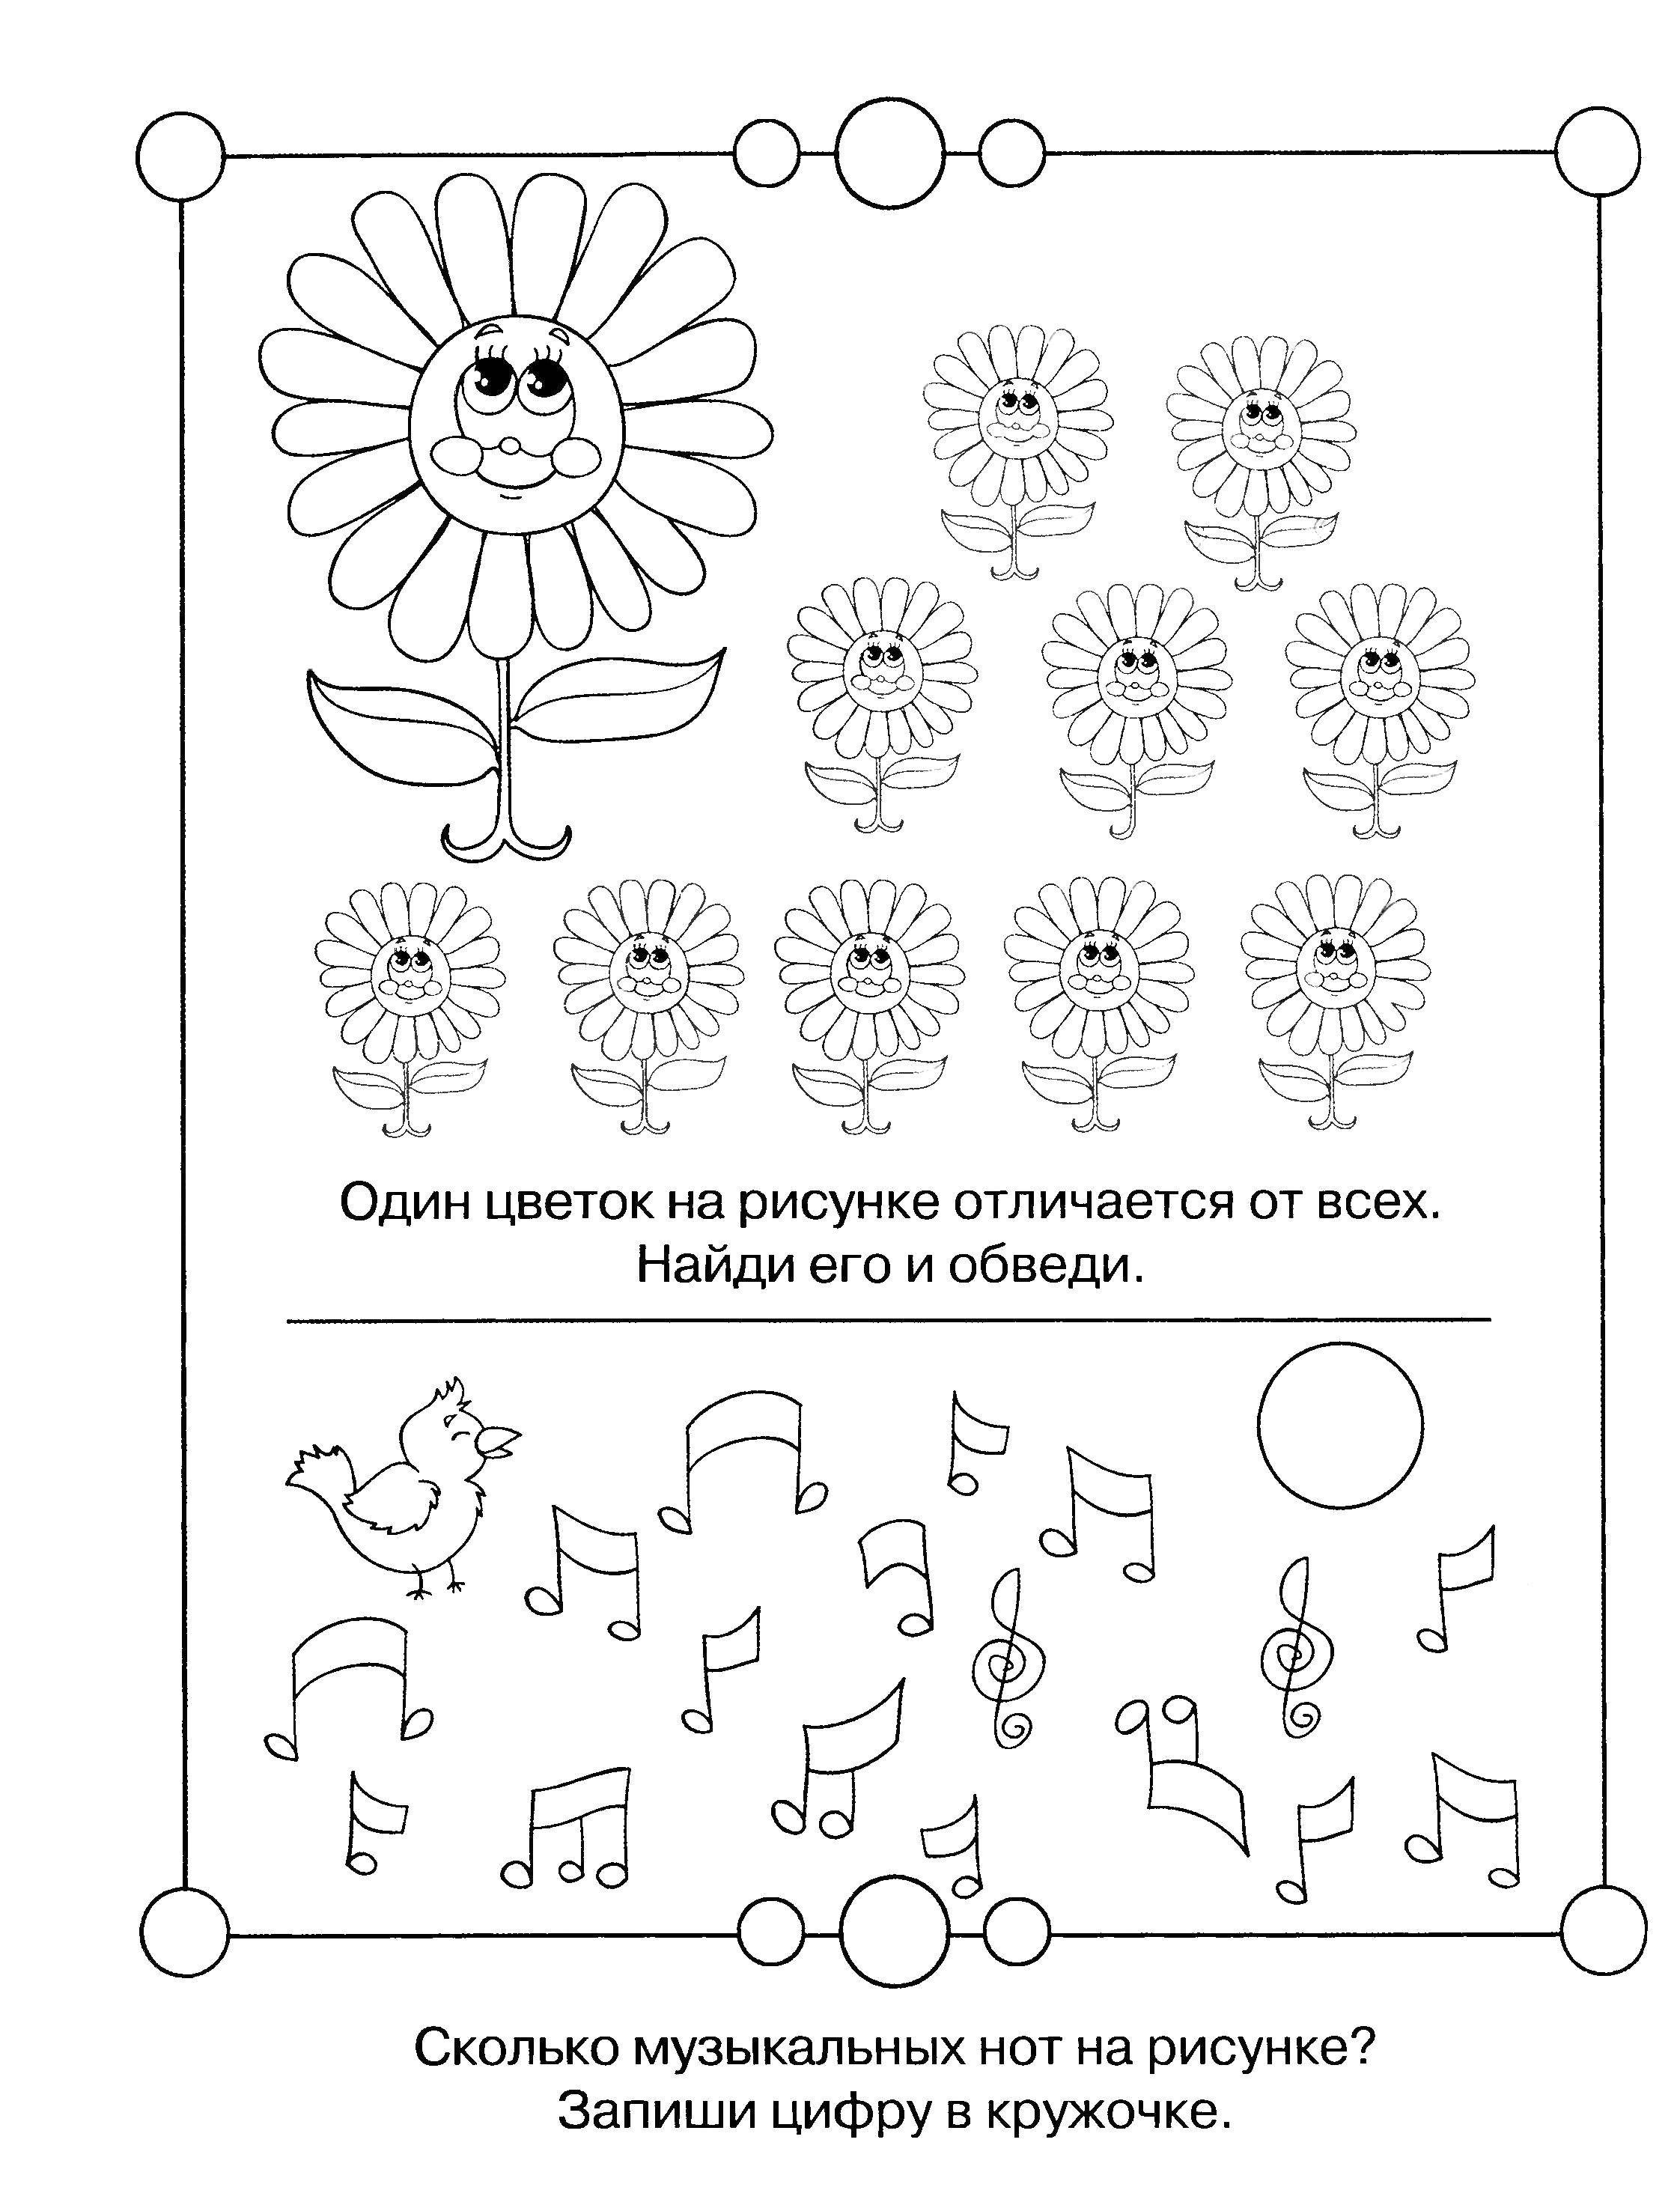 Coloring Count the notes. Category riddles for kids. Tags:  Teaching coloring, logic.